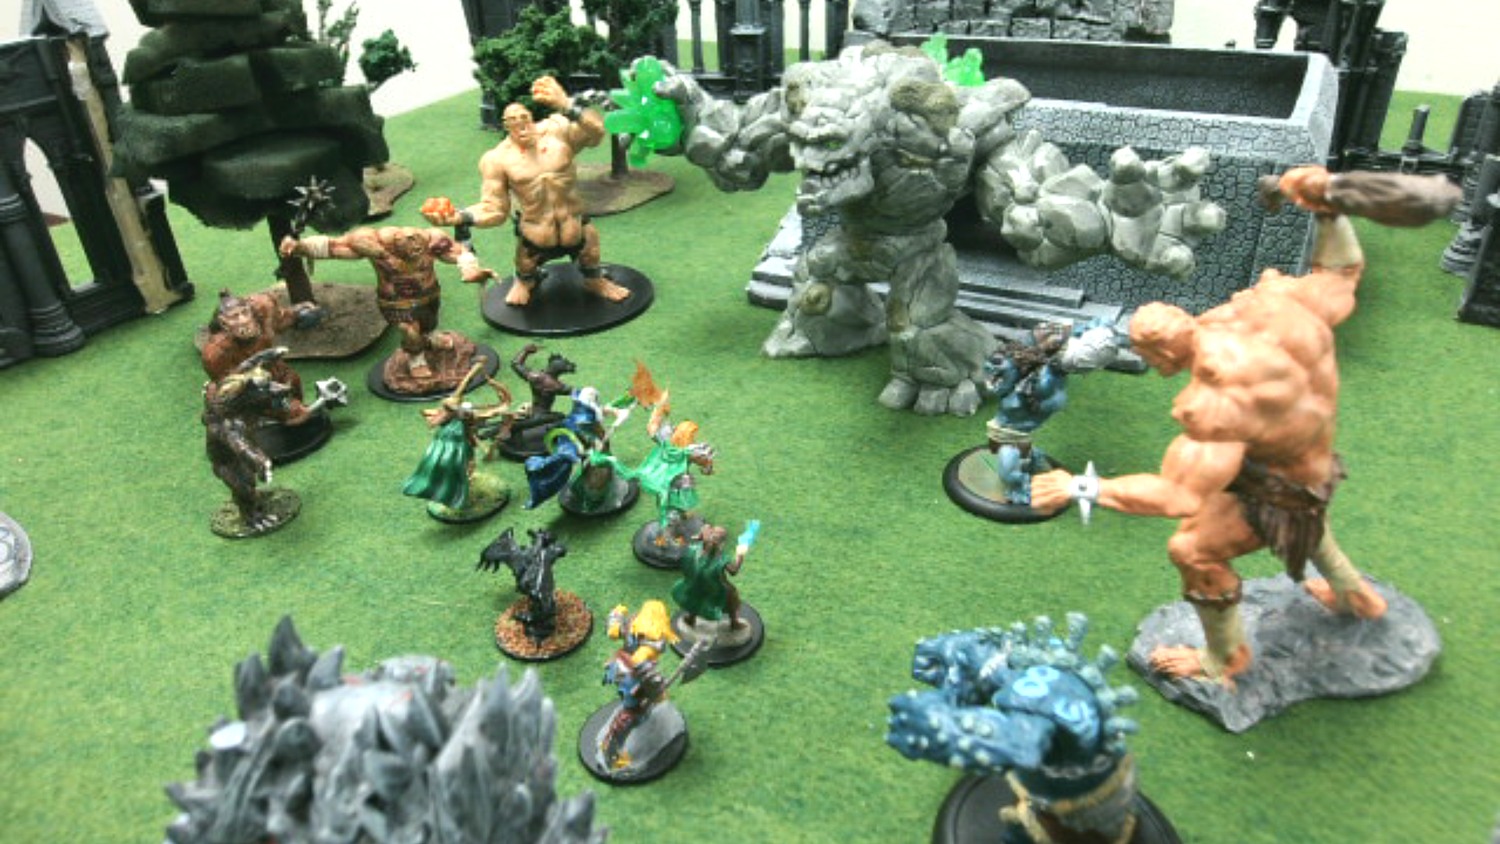 Miniature monster figures about to fight